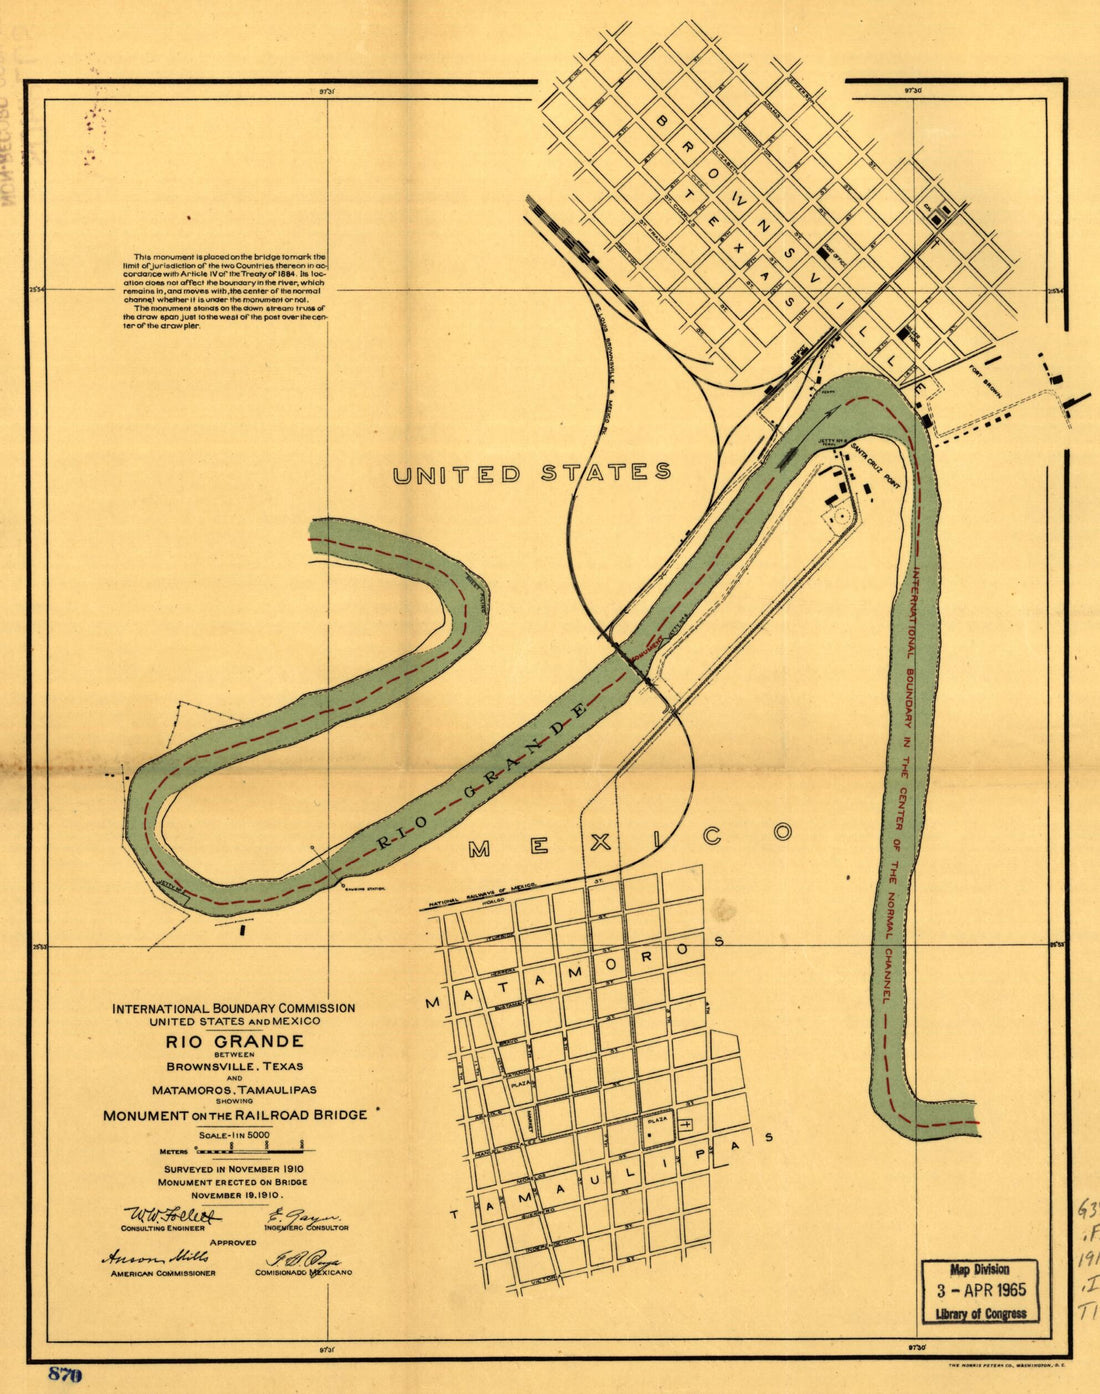 This old map of Boundaries Between Brownsville, Texas and Matamoros, Tam. (Mexico) from 1910 was created by United States and Mexico International Boundary Commission in 1910